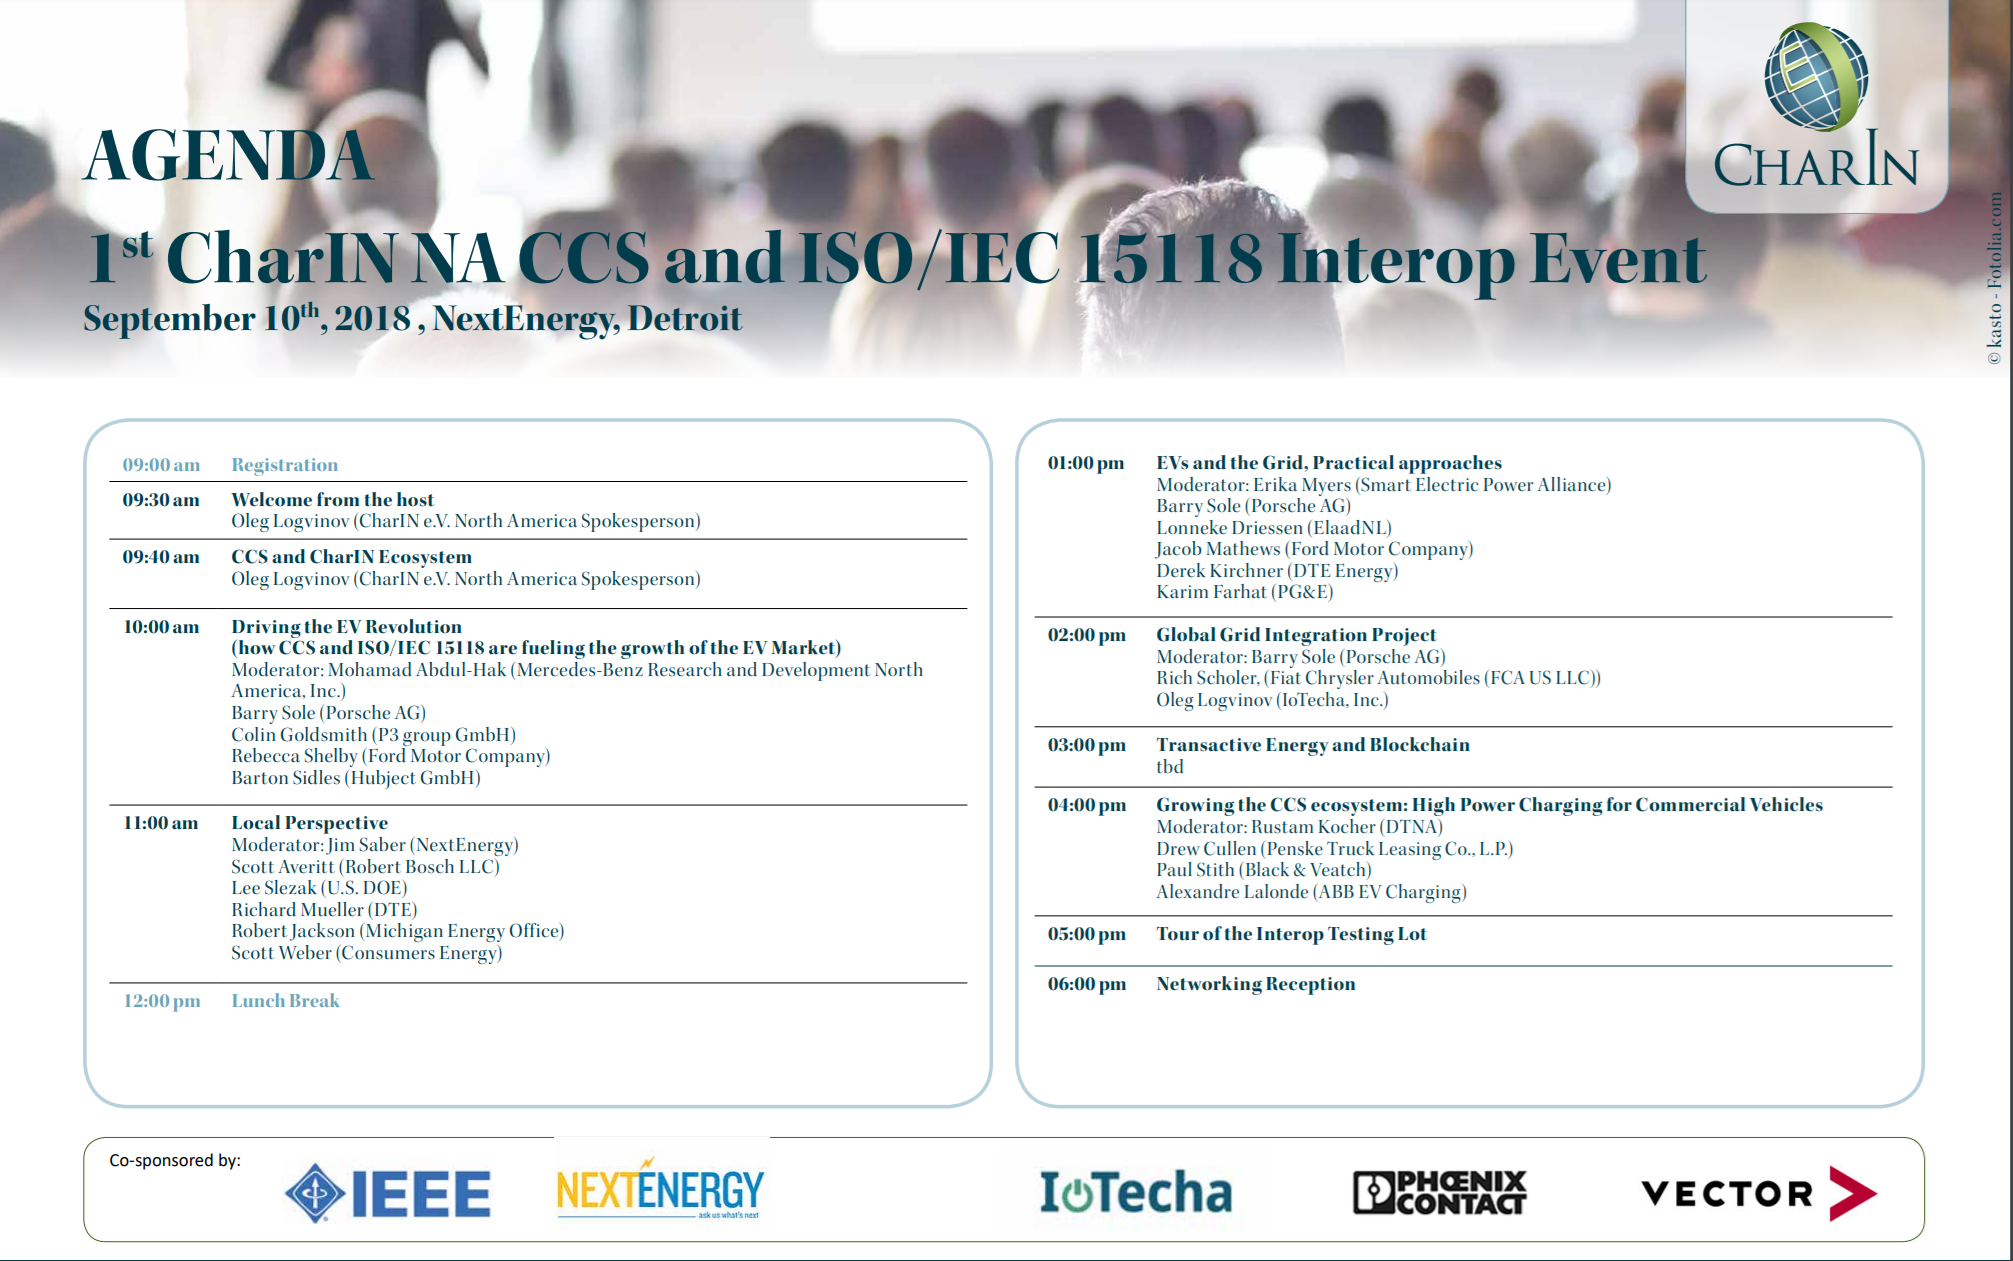 DO NOT MISS THE 1ST CHARIN NA CCS AND ISO/IEC 15118 INTEROP EVENT – AN OPPORTUNITY TO SEE THE FUTURE OF THE EV INDUSTRY!